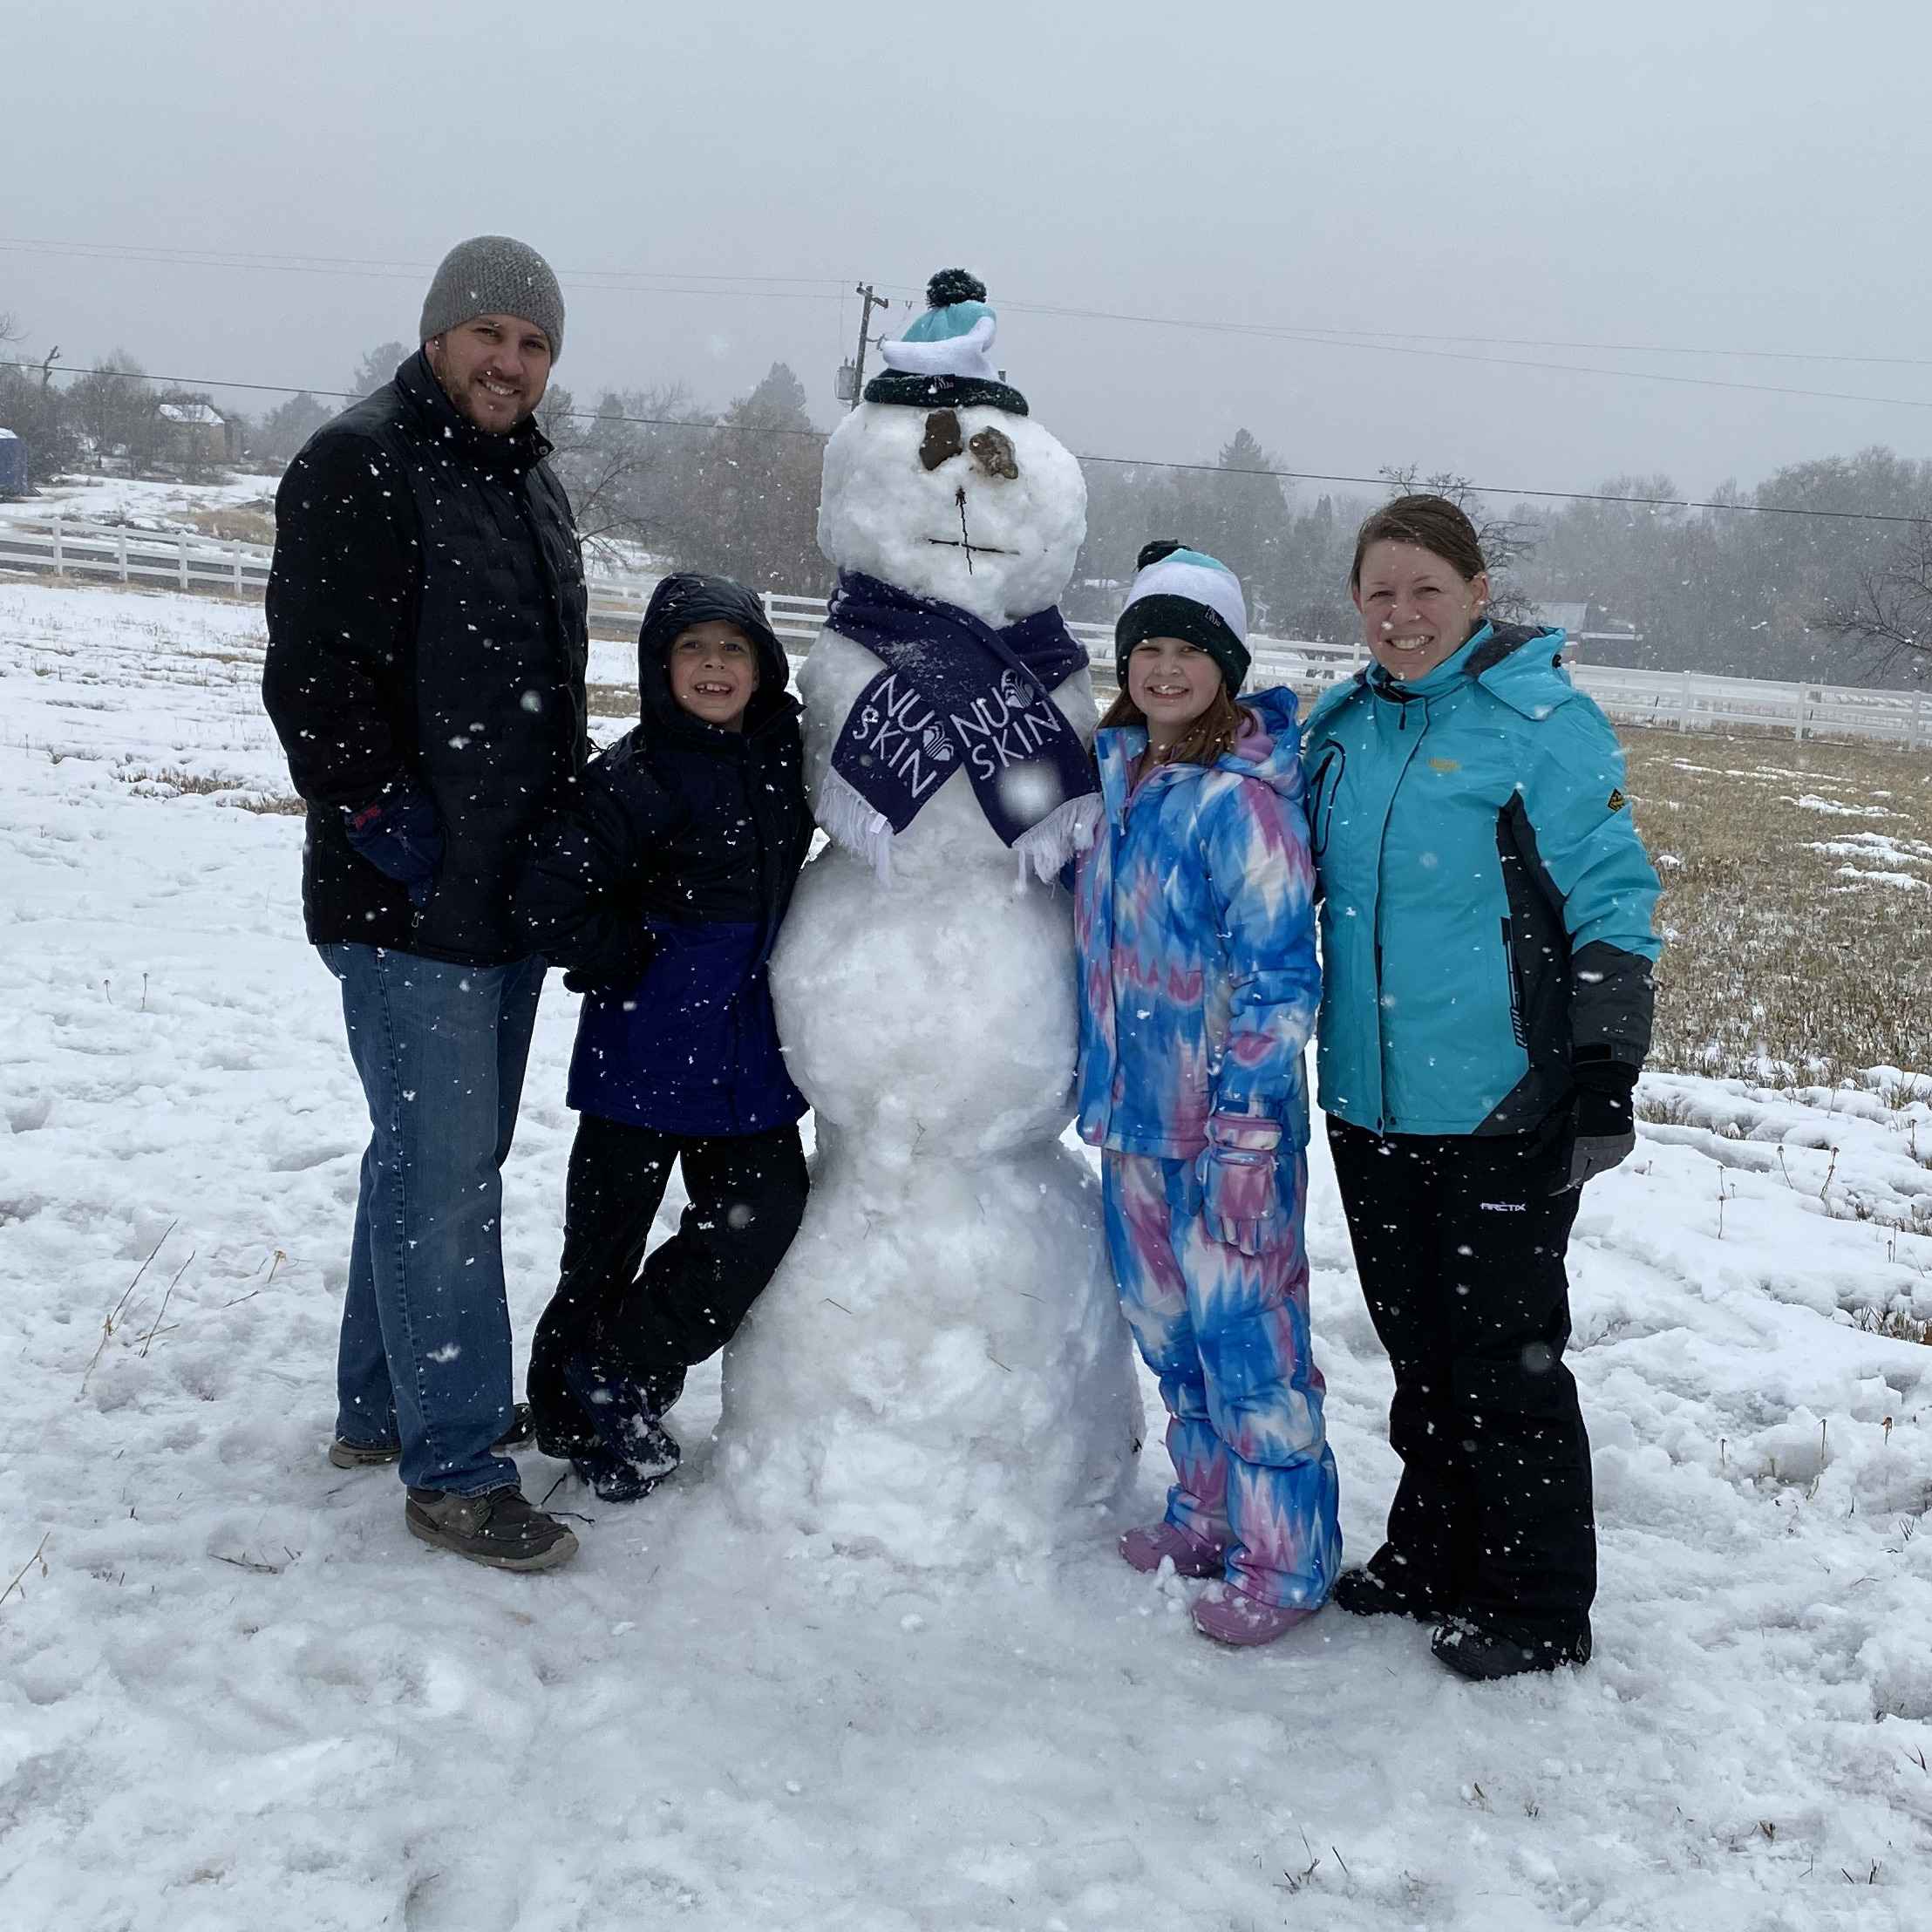 Always a fun time with Steve the Snowman!